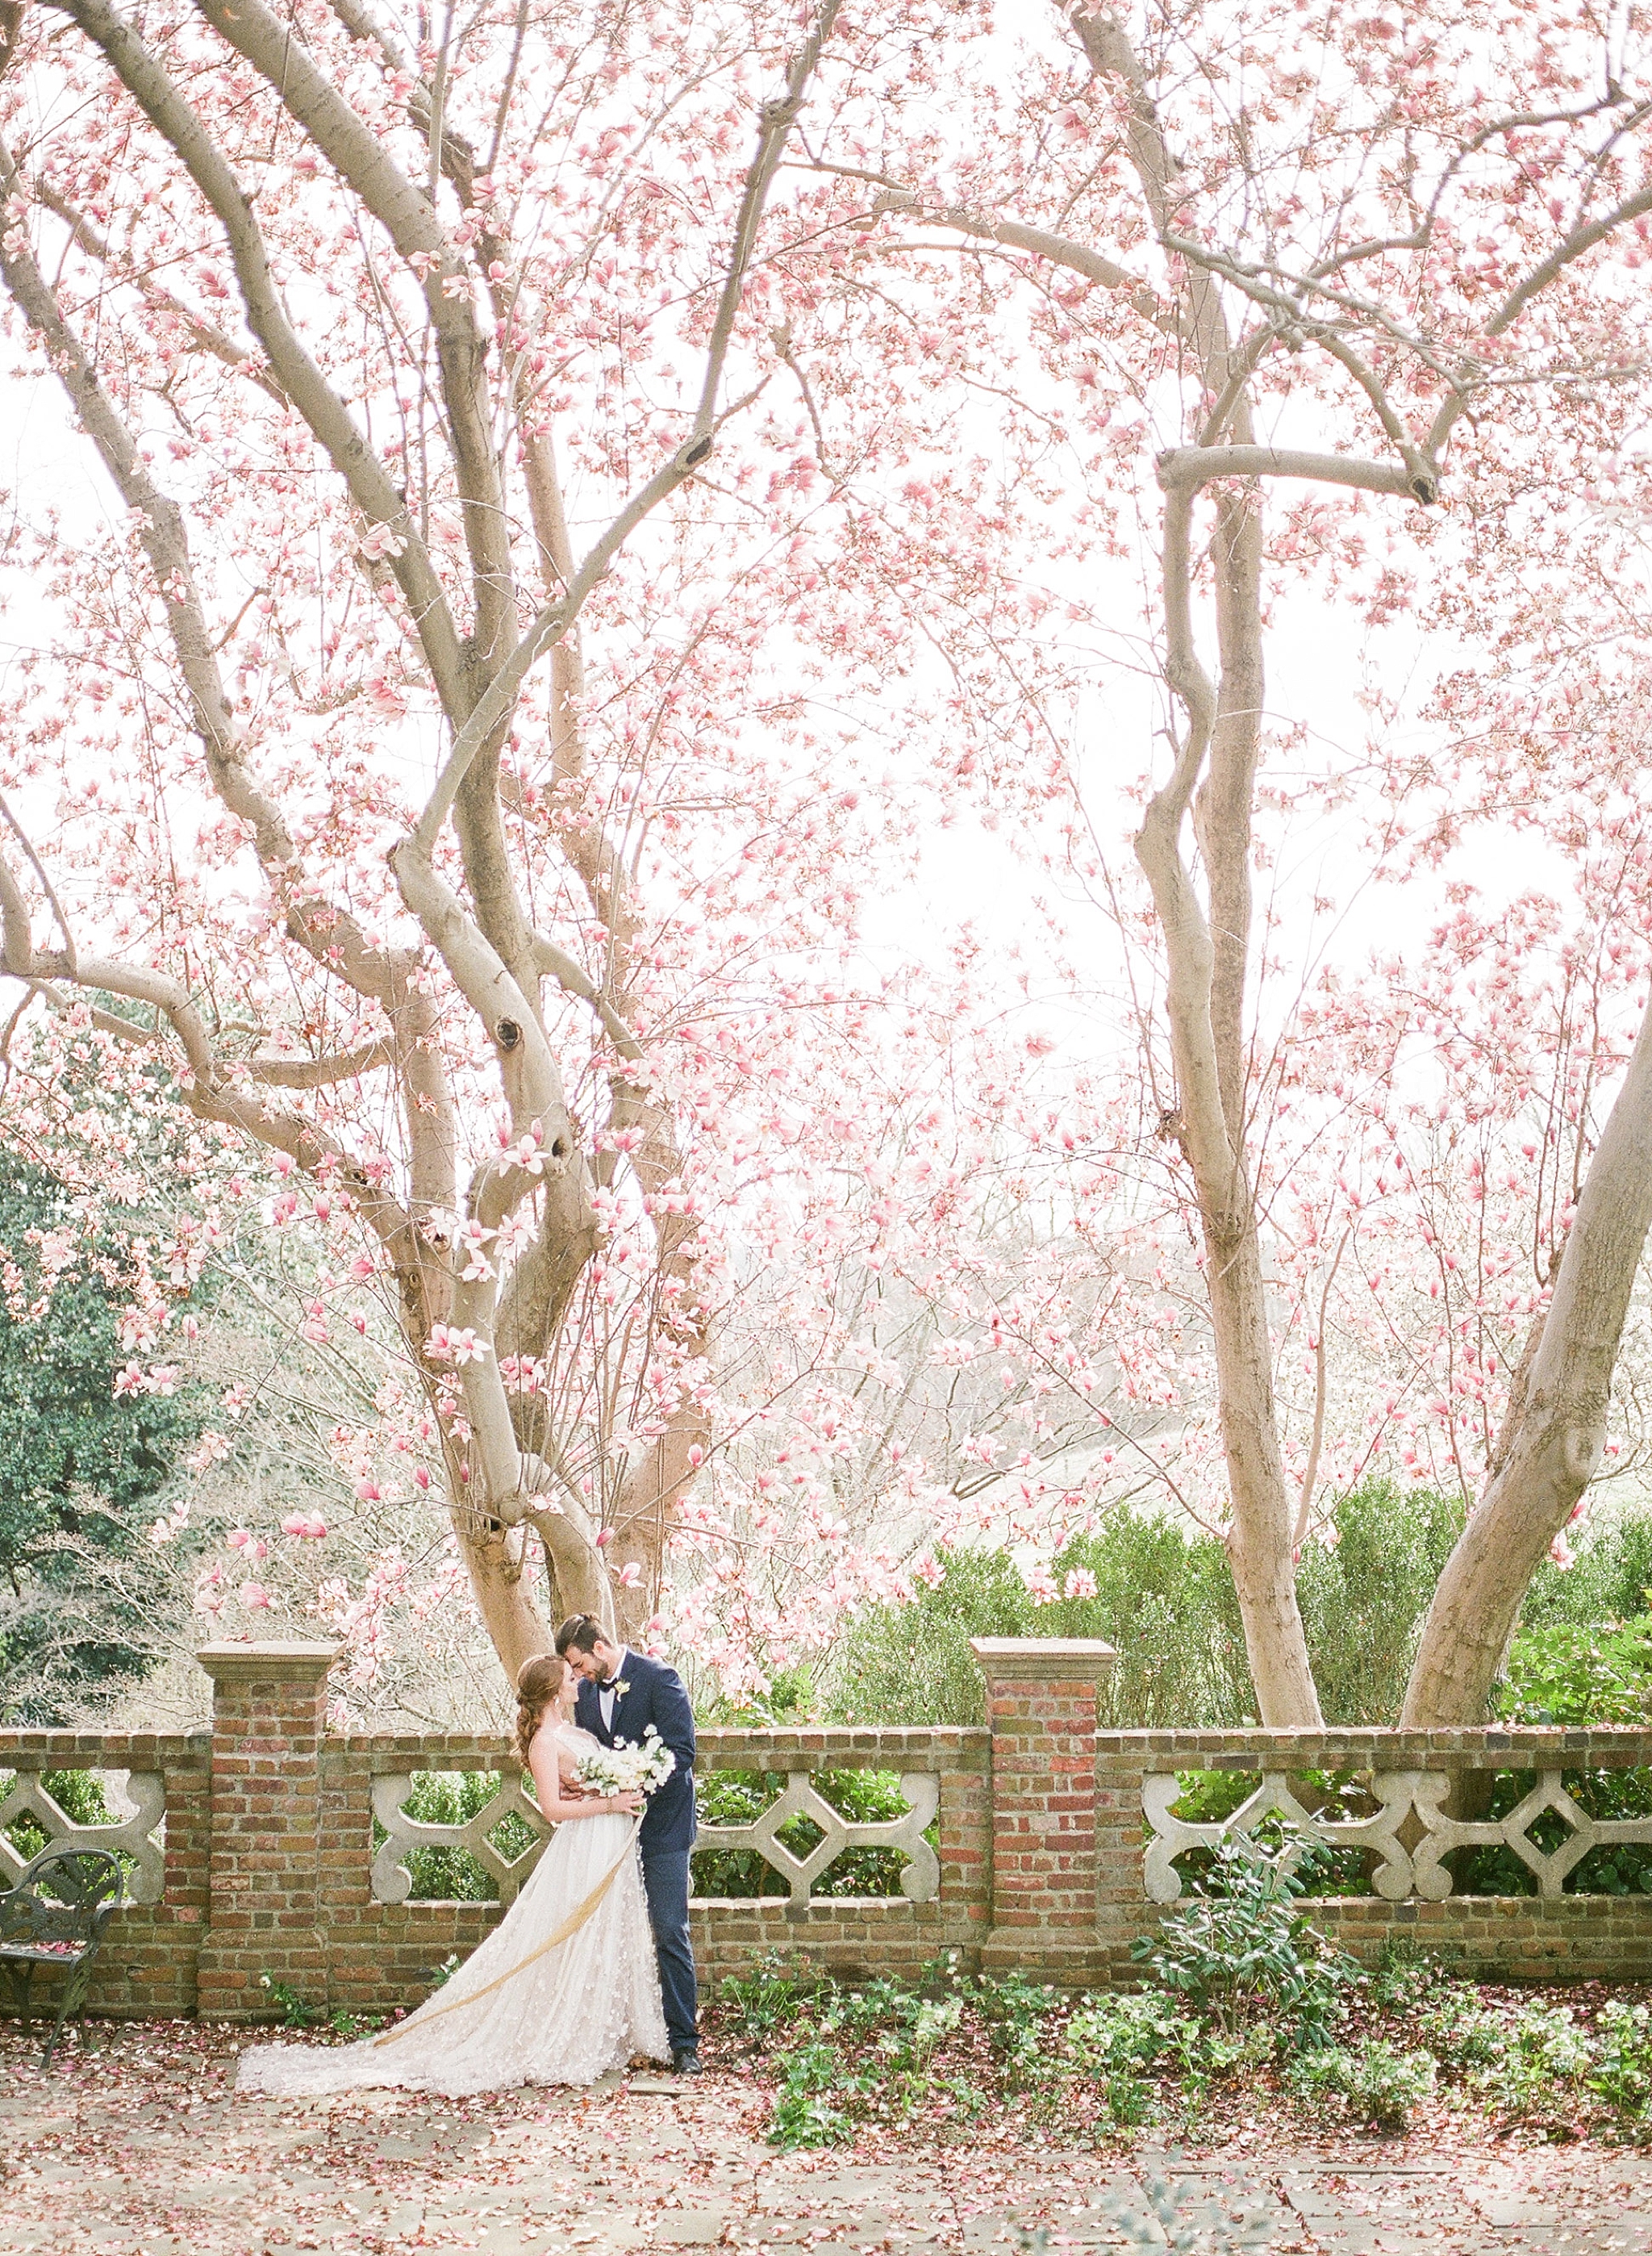 The historical Virginia House in Richmond, VA is the perfect setting for this enchanting, old-world inspired wedding captured by fine art film photographer, Alicia Lacey. 